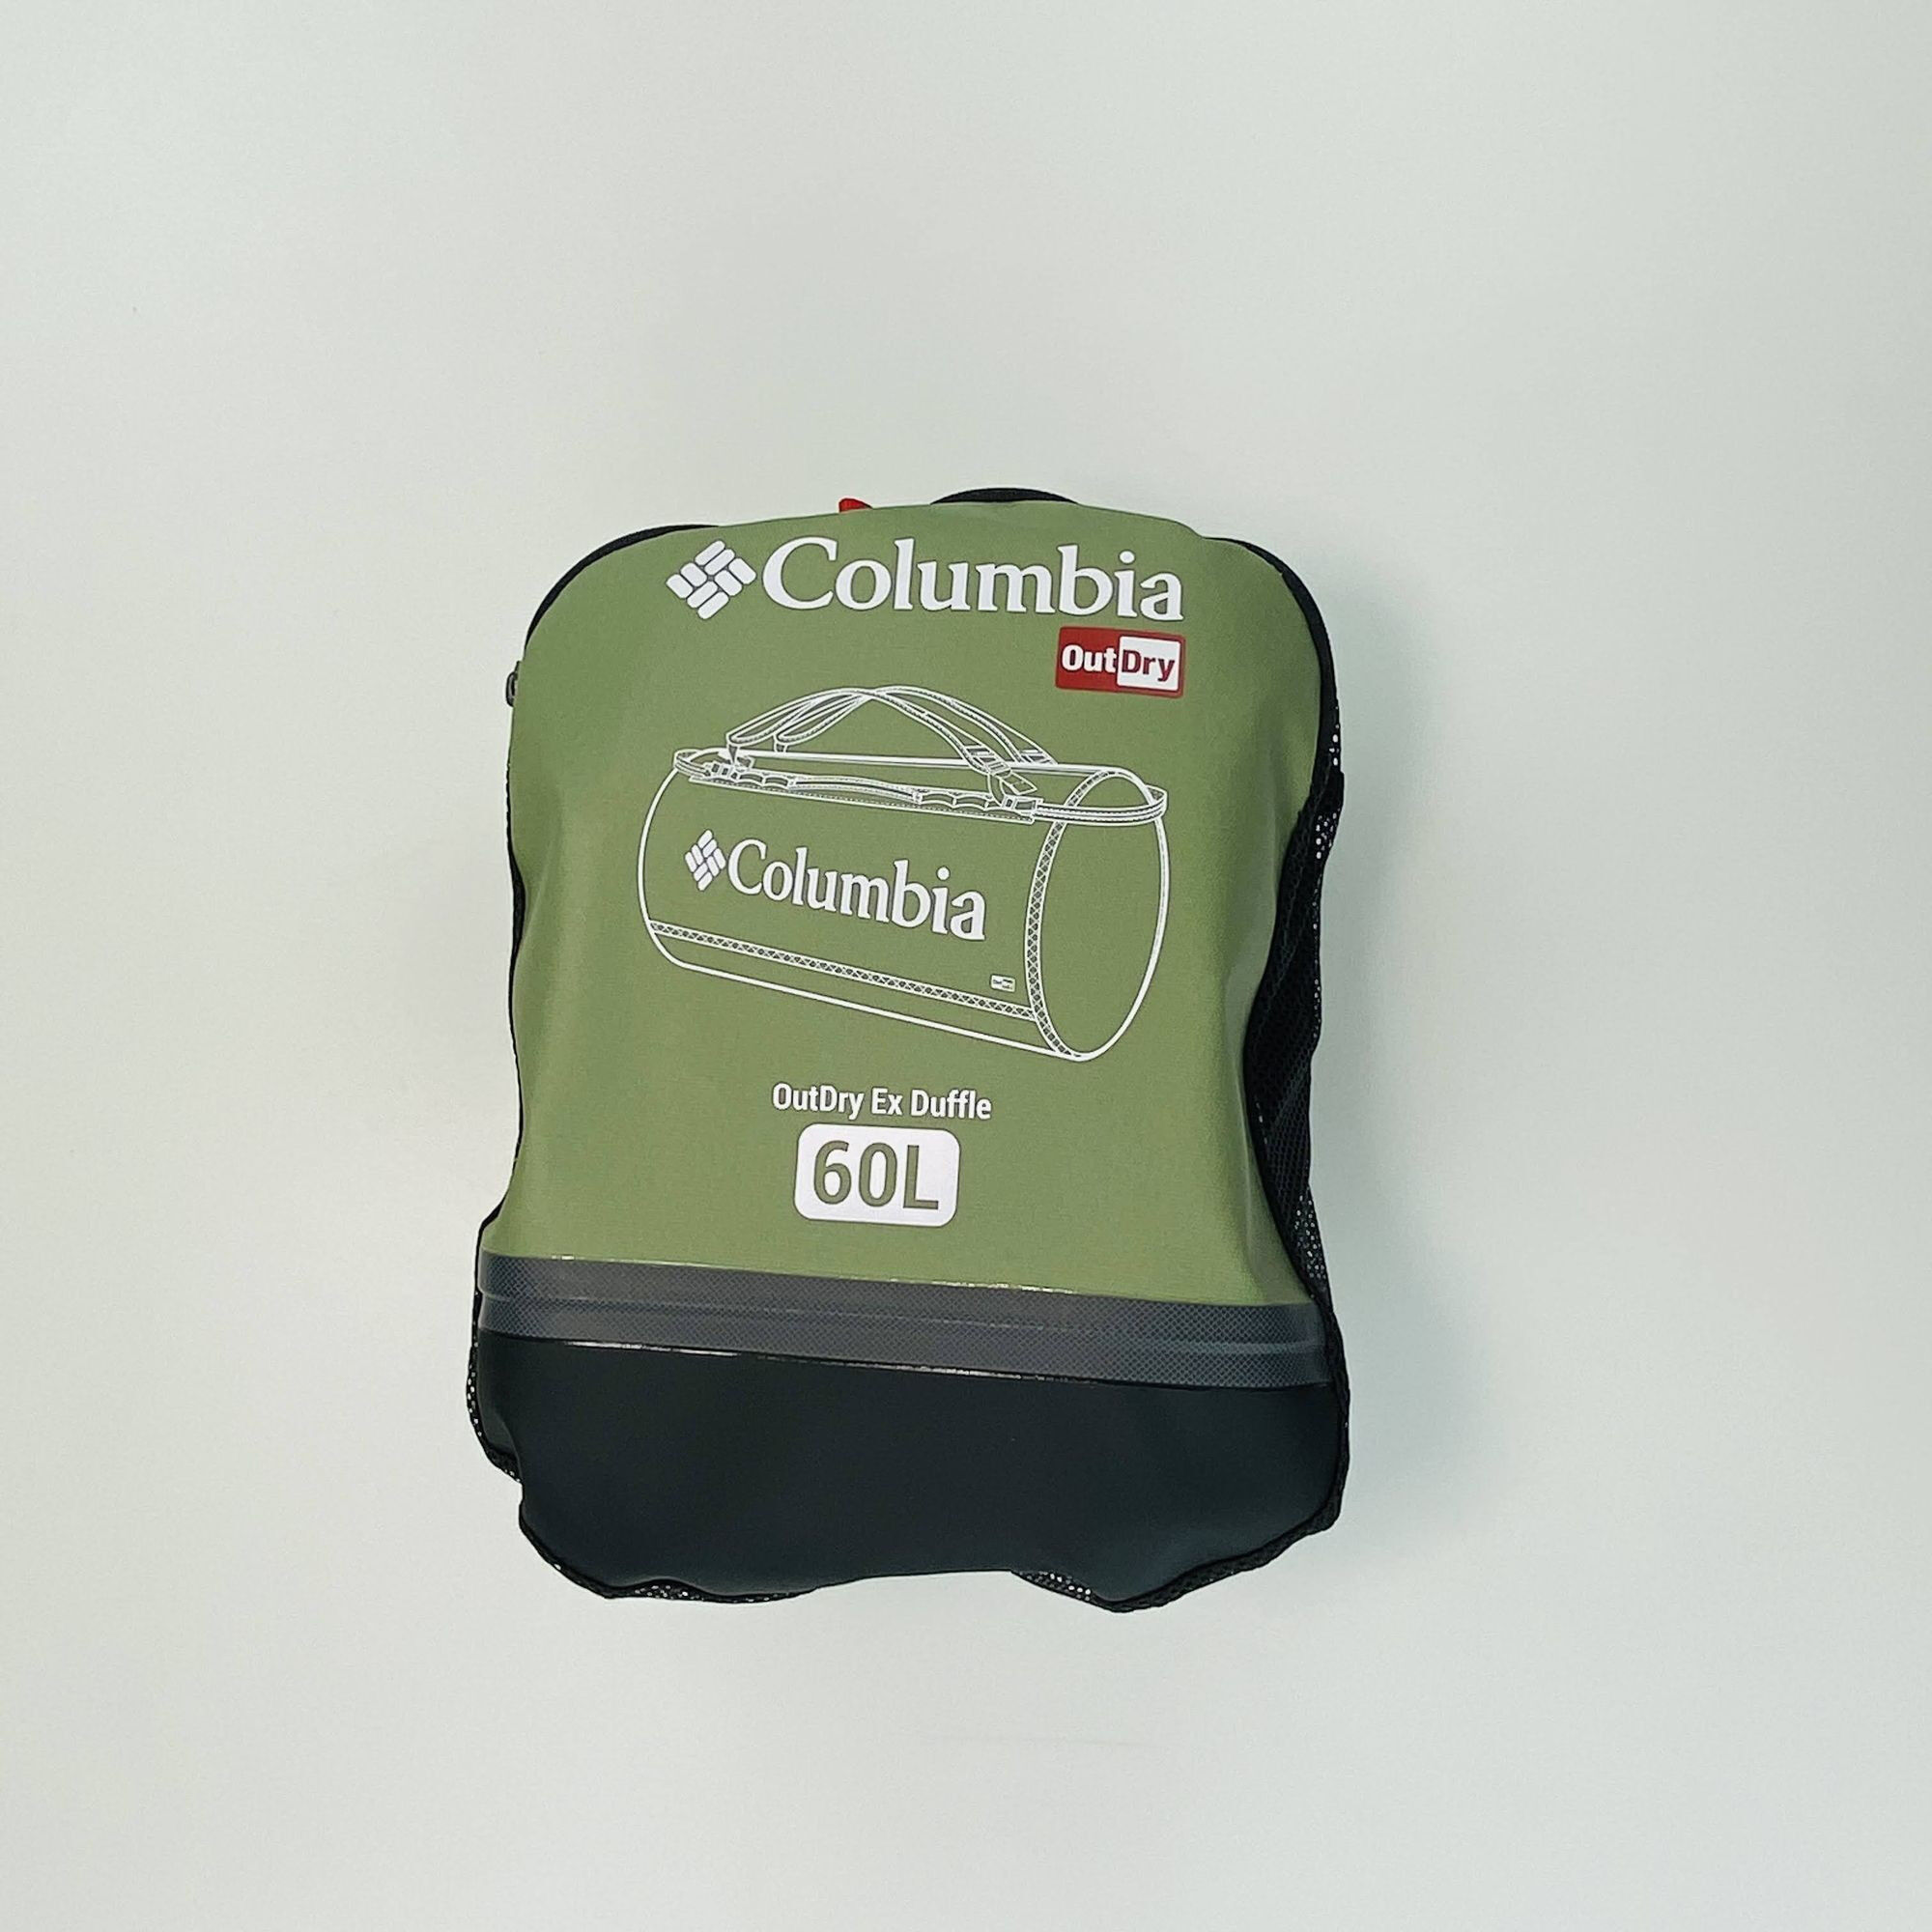 Columbia OutDry Ex™ 60L Duffle - Second hand Duffel Bag - Olive green - One Size | Hardloop